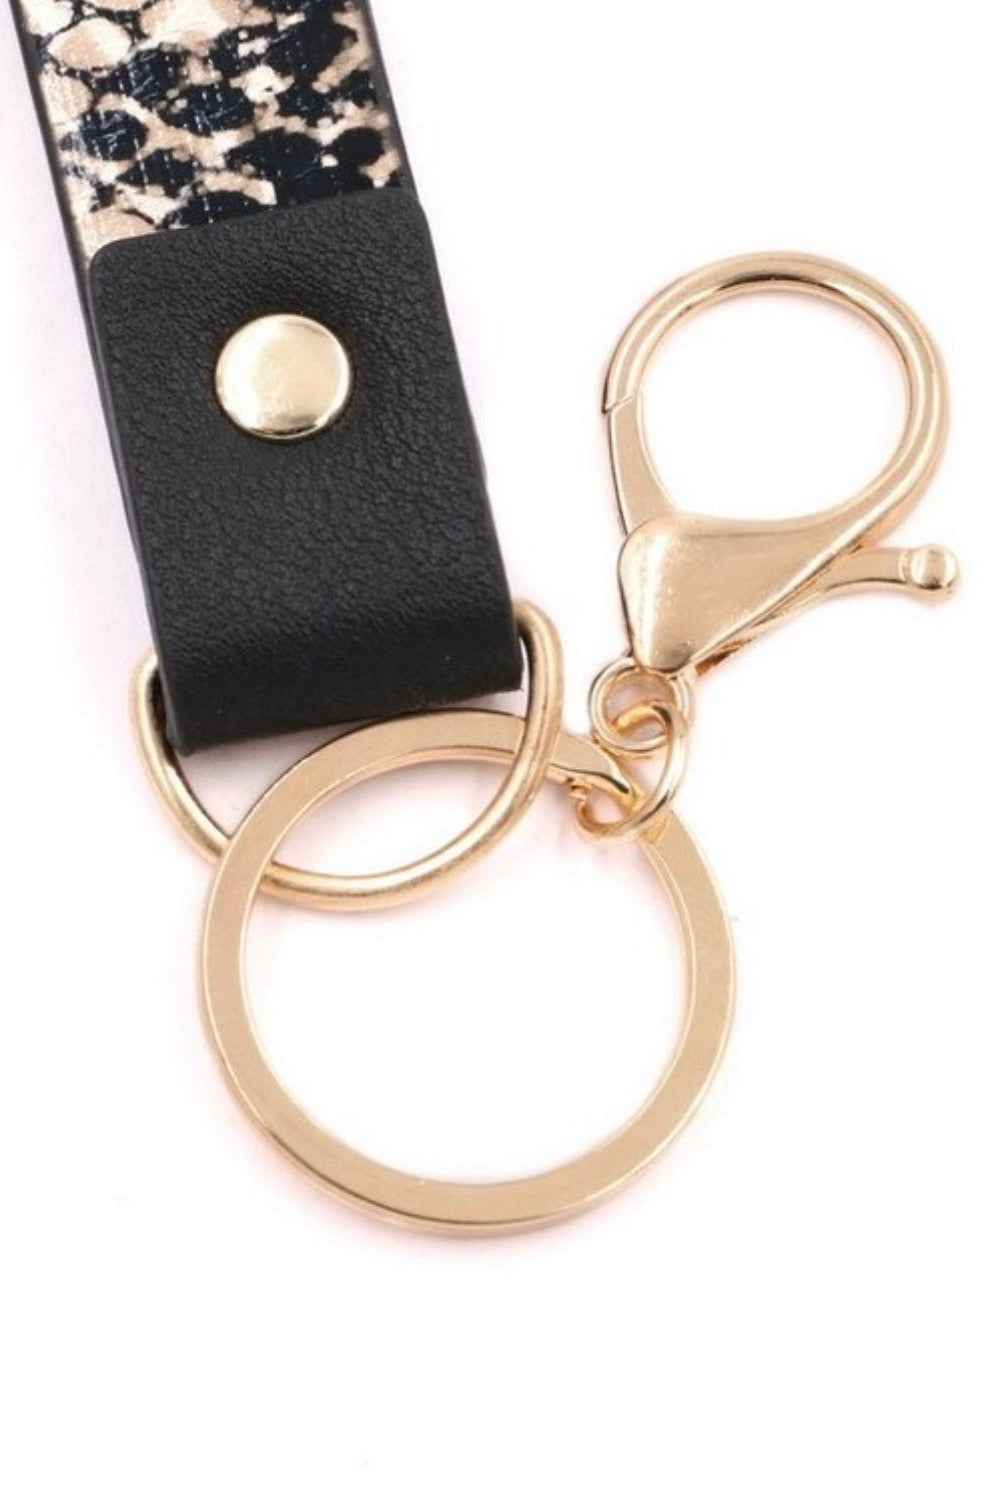 Snake Print Key Chain - Corinne an Affordable Women's Clothing Boutique in the US USA